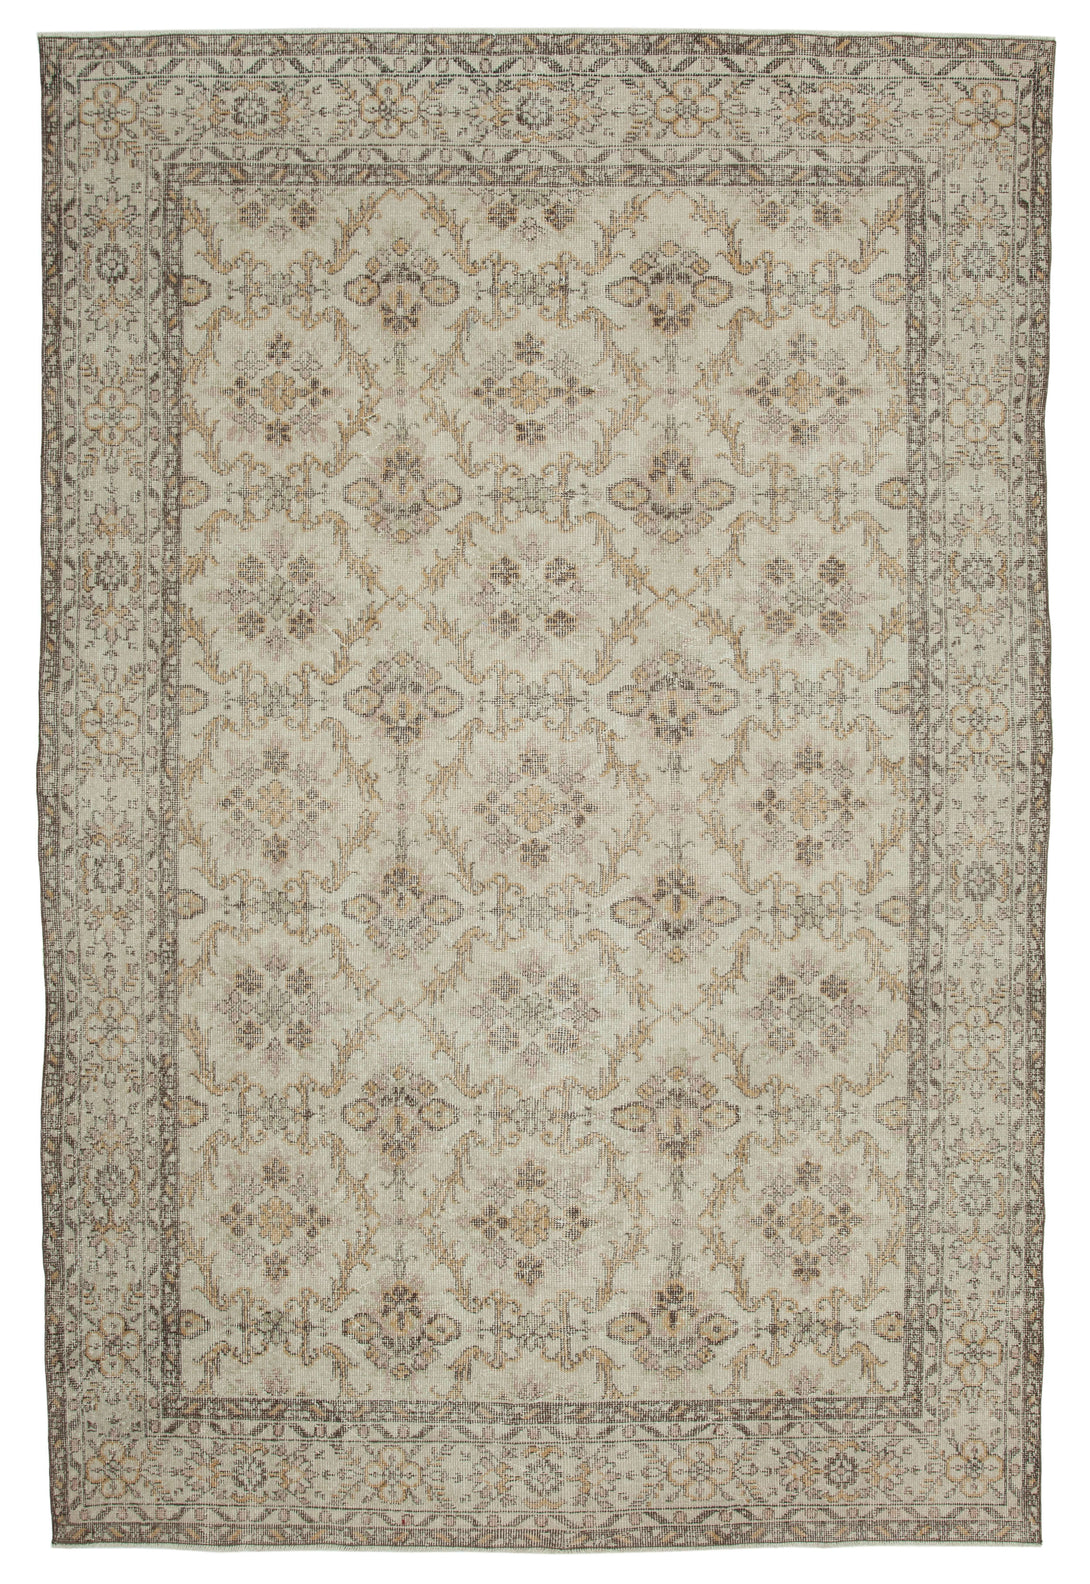 Handmade White Wash Area Rug > Design# OL-AC-33939 > Size: 6'-11" x 10'-8", Carpet Culture Rugs, Handmade Rugs, NYC Rugs, New Rugs, Shop Rugs, Rug Store, Outlet Rugs, SoHo Rugs, Rugs in USA